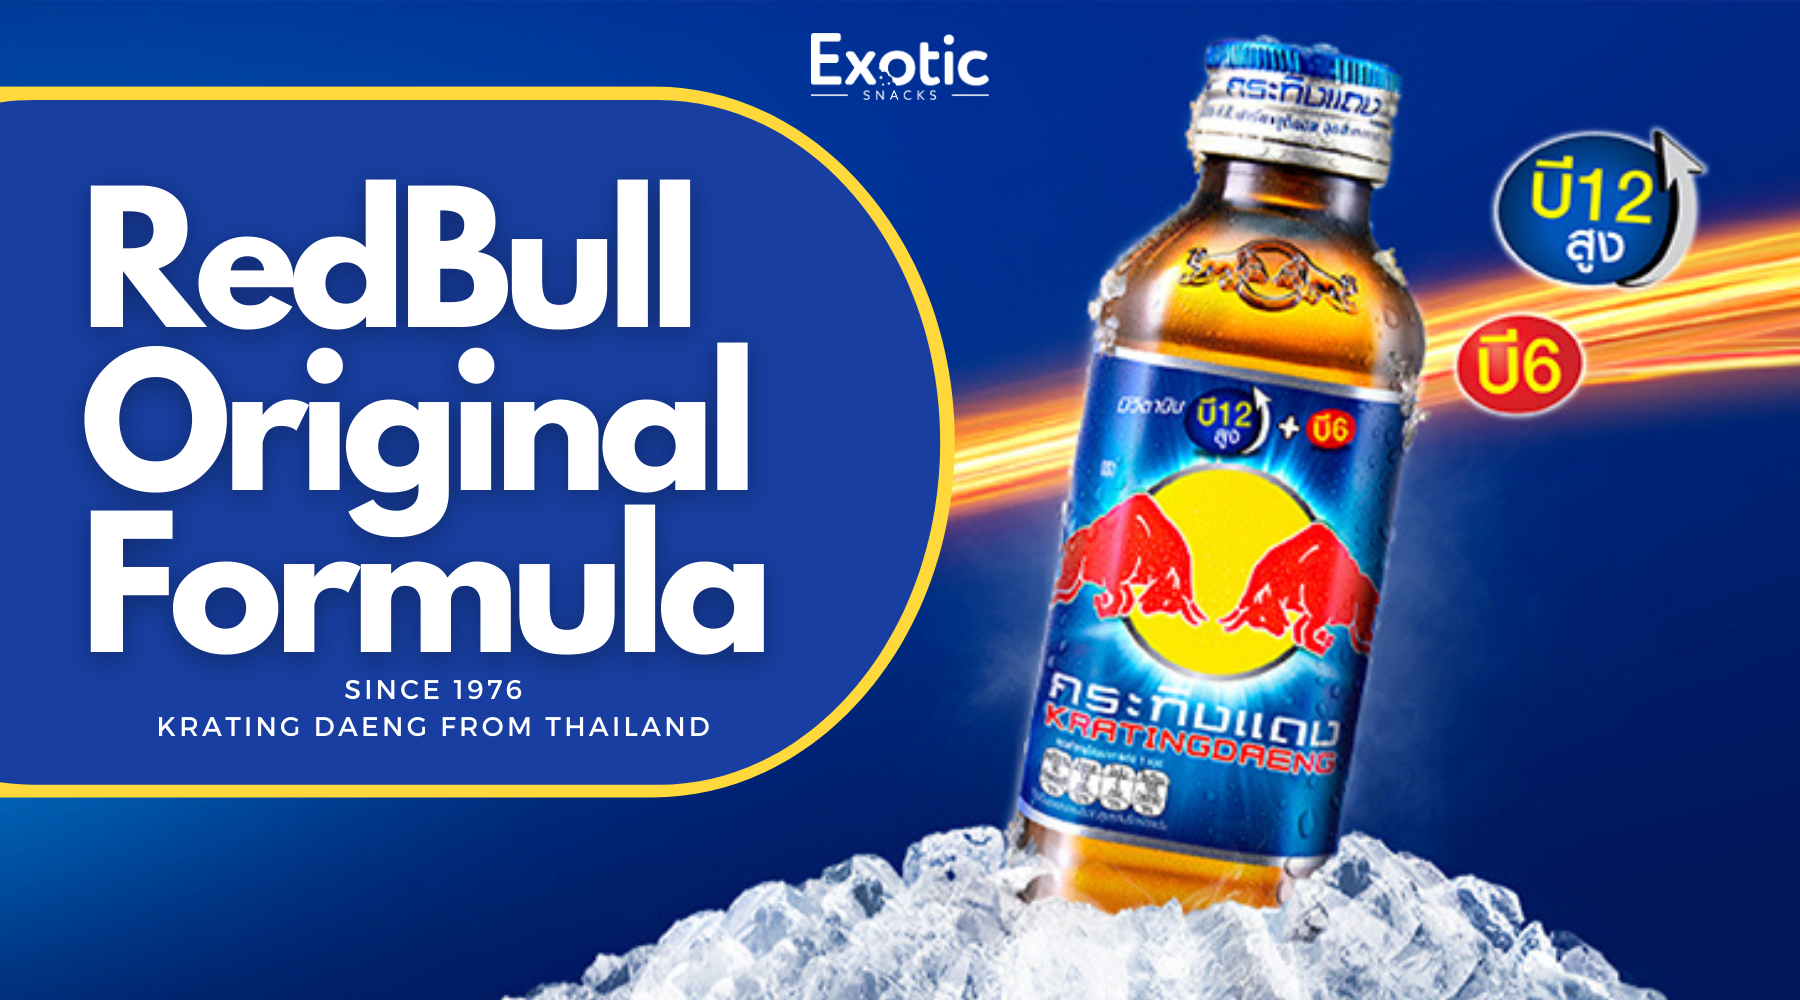 Red Bull Krating Daeng: The Energy Drink That Started it All Exotic Snacks Company